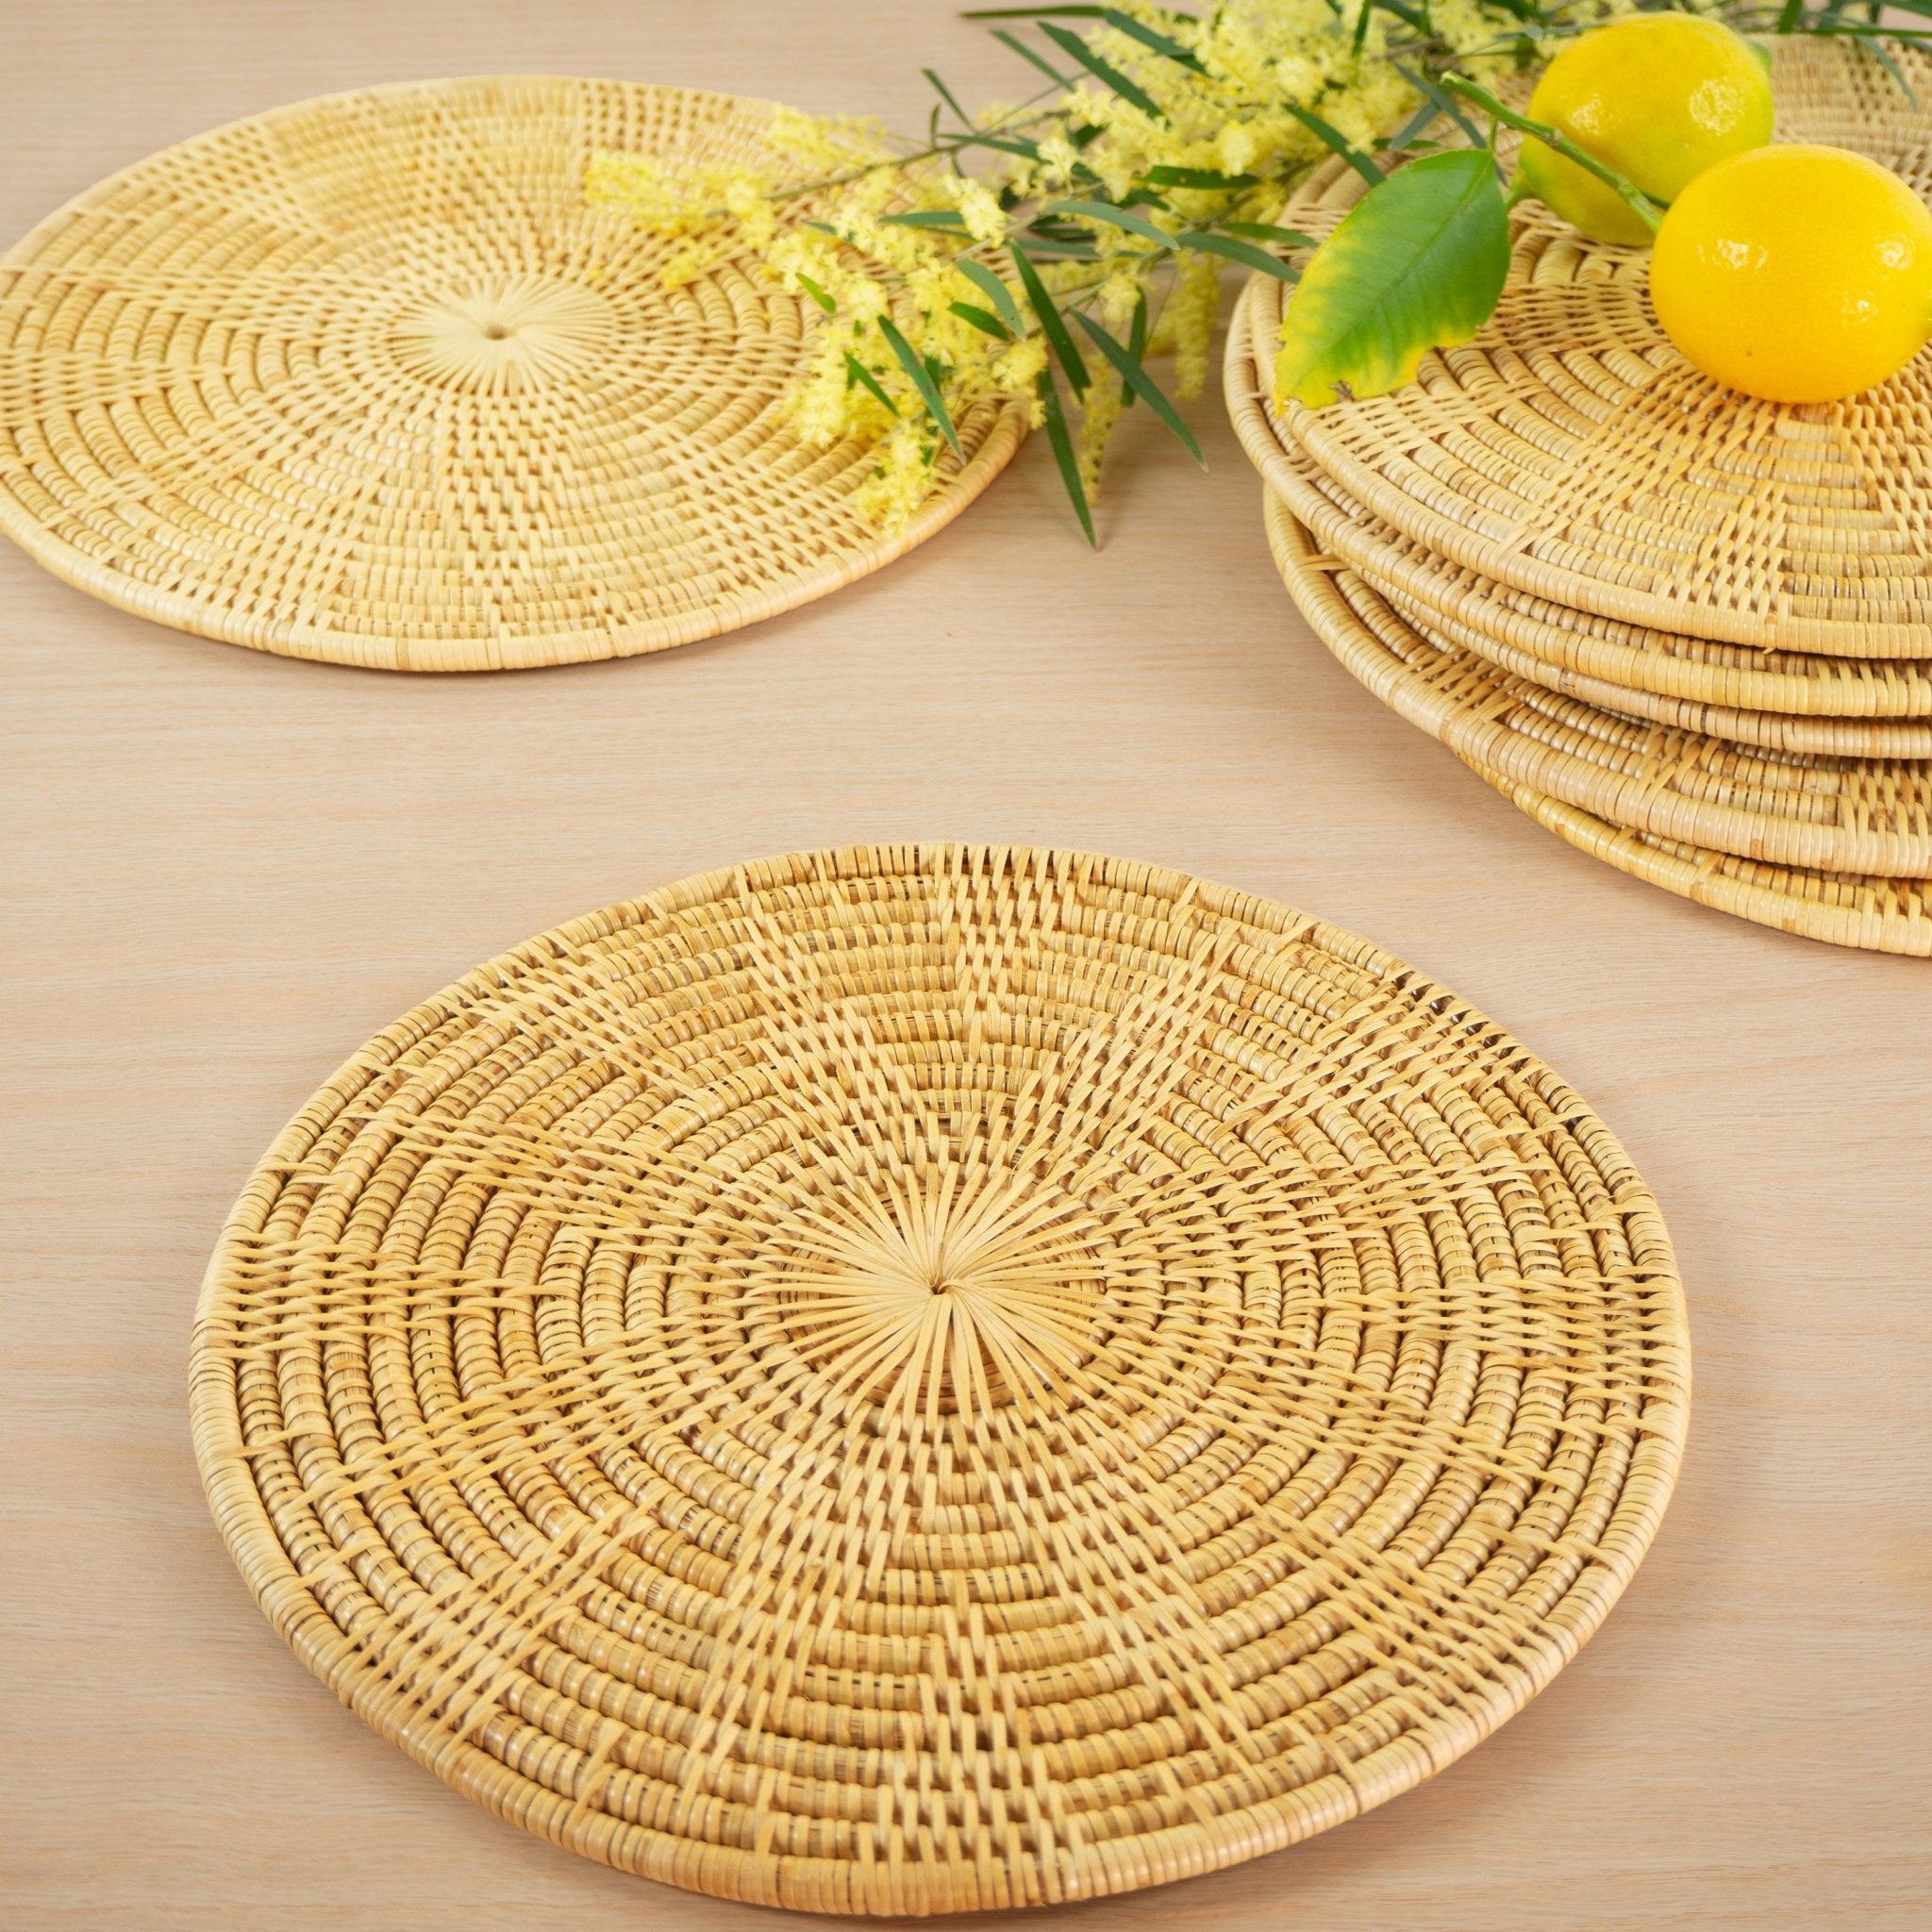 Eight round rattan handwoven artisan placemats from Cambodia on wooden table with lemons and Australian native wattle